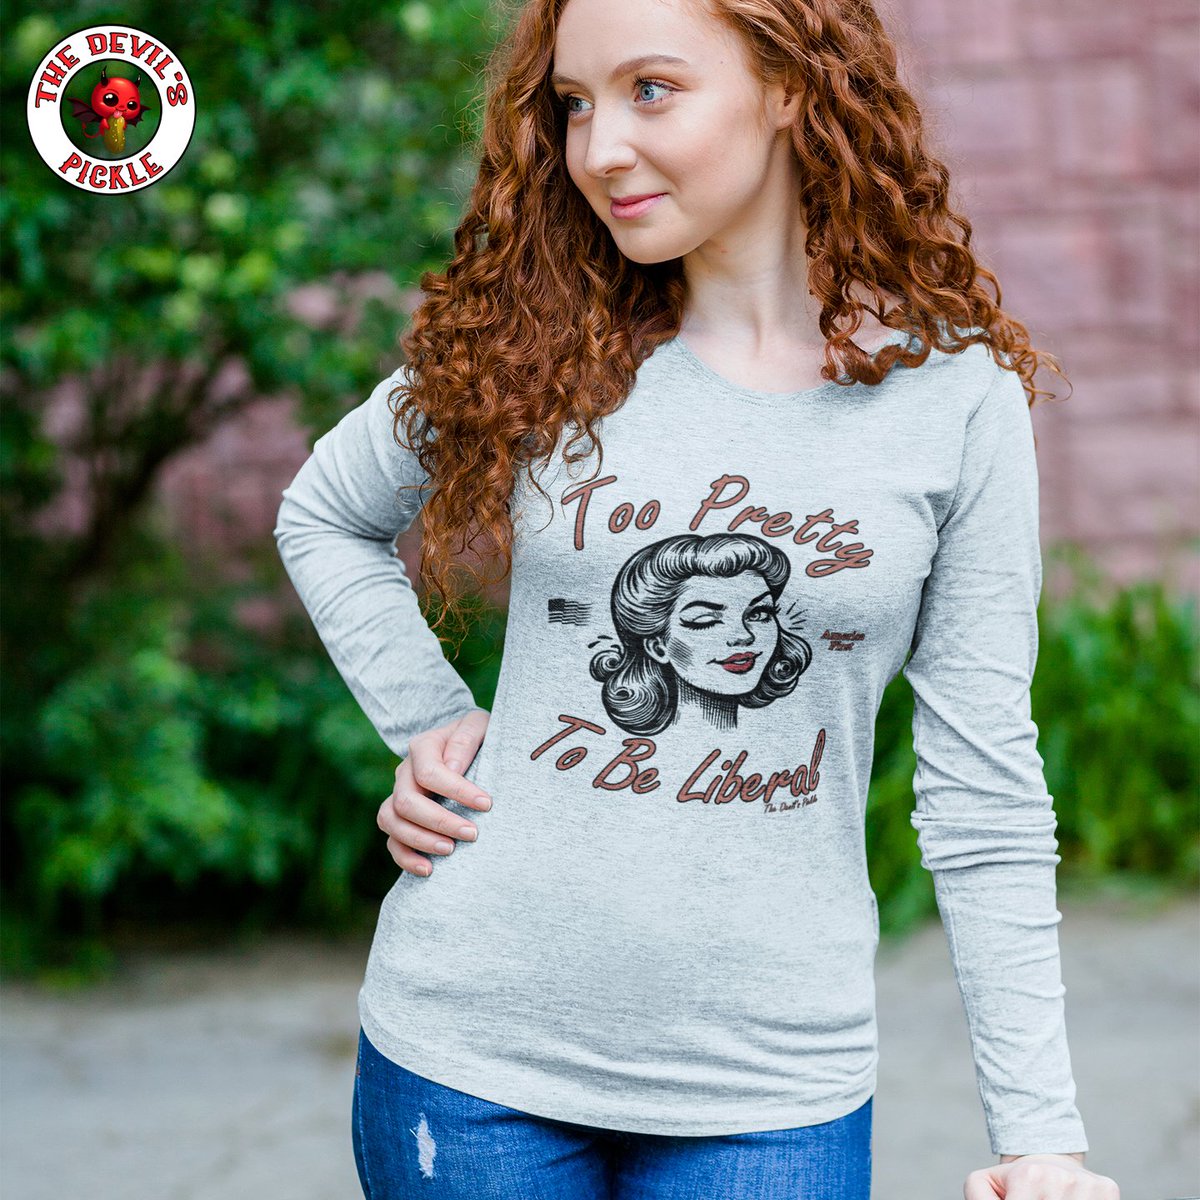 Can't be liberal when I'm looking this pretty in my long sleeve tee 💁‍♀️ Adult Humor, Patriotic, Workout and More at The Devil's Pickle.

#freeshipping #american #offensivetshirts #adultinghumor #adulttees #patriot #americanpride #hellyeahamerica #proudtobeanamerican #Freedom #USA